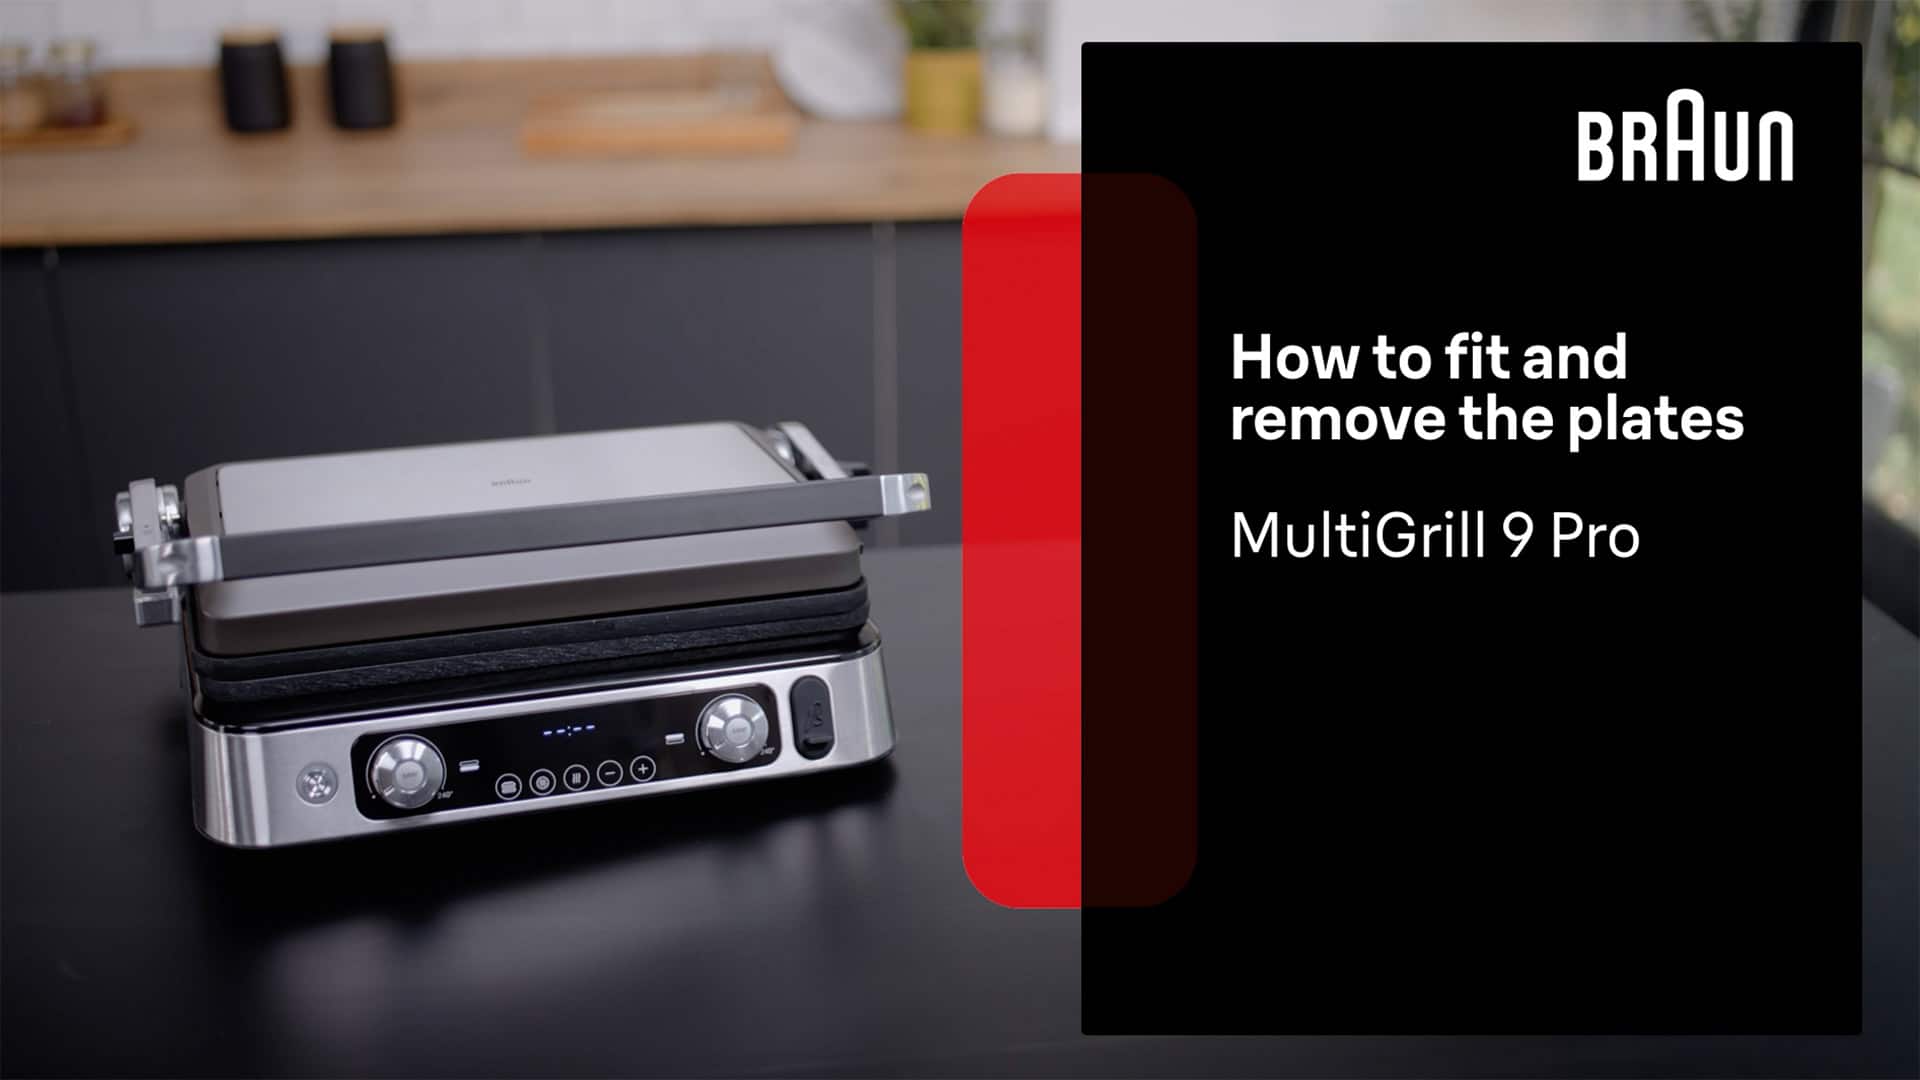 Braun MultiGrill 9 Pro | How to Fit and Remove the Plates